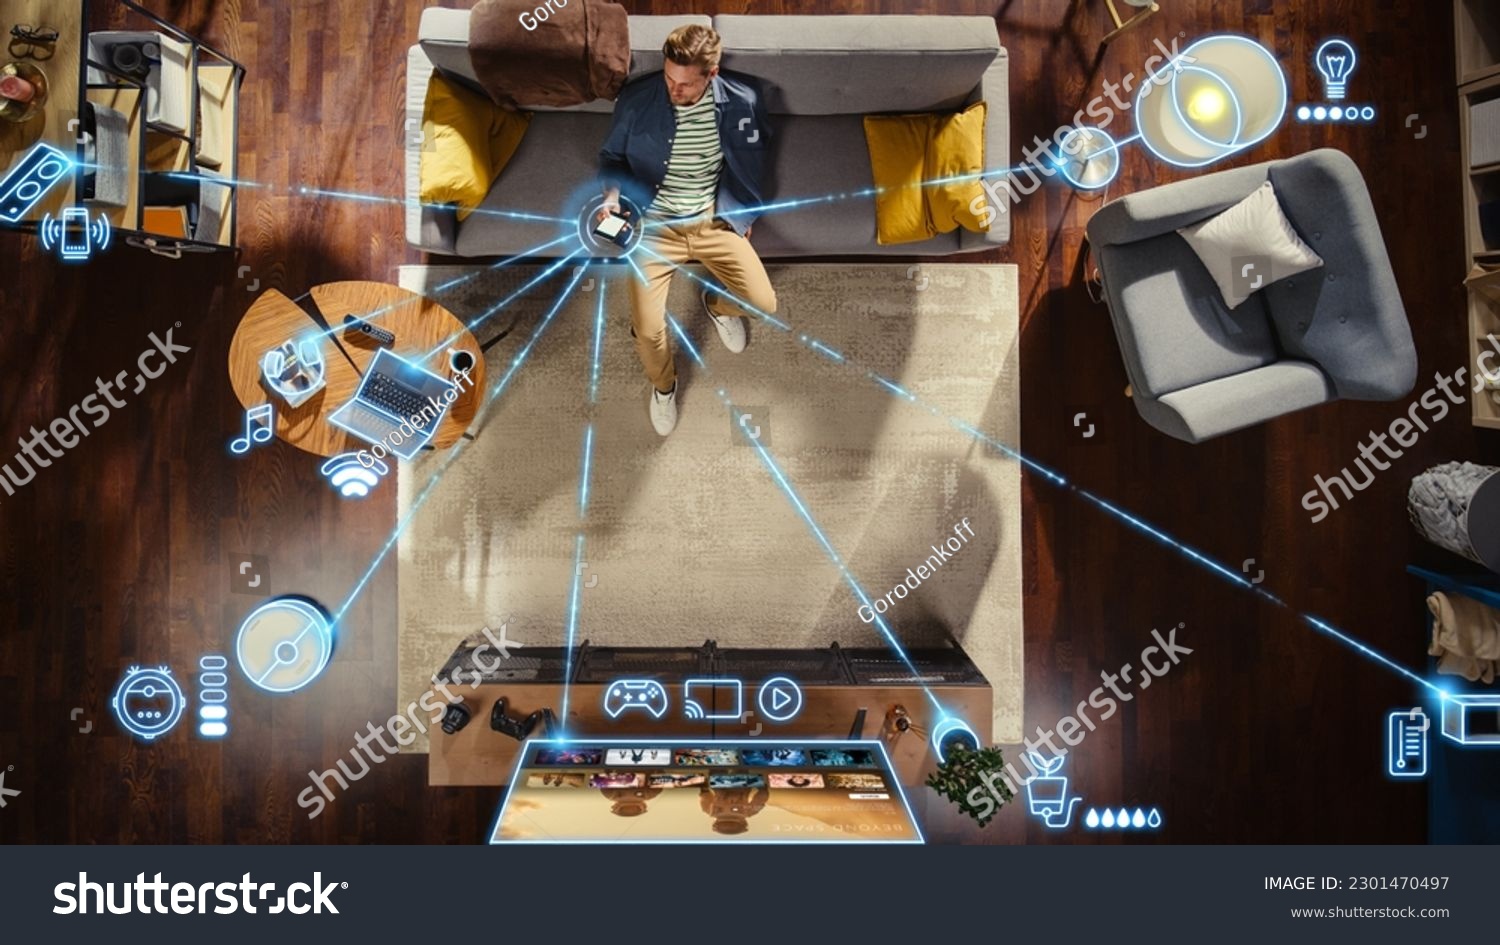 Top View Of Caucasian Man In the Loft Apartment Sitting Down on The Couch and Connecting Smartphone to Convenient Smart Home System. VFX Edit Visualizing Connected Devices. Laptop, TV, Speaker. #2301470497